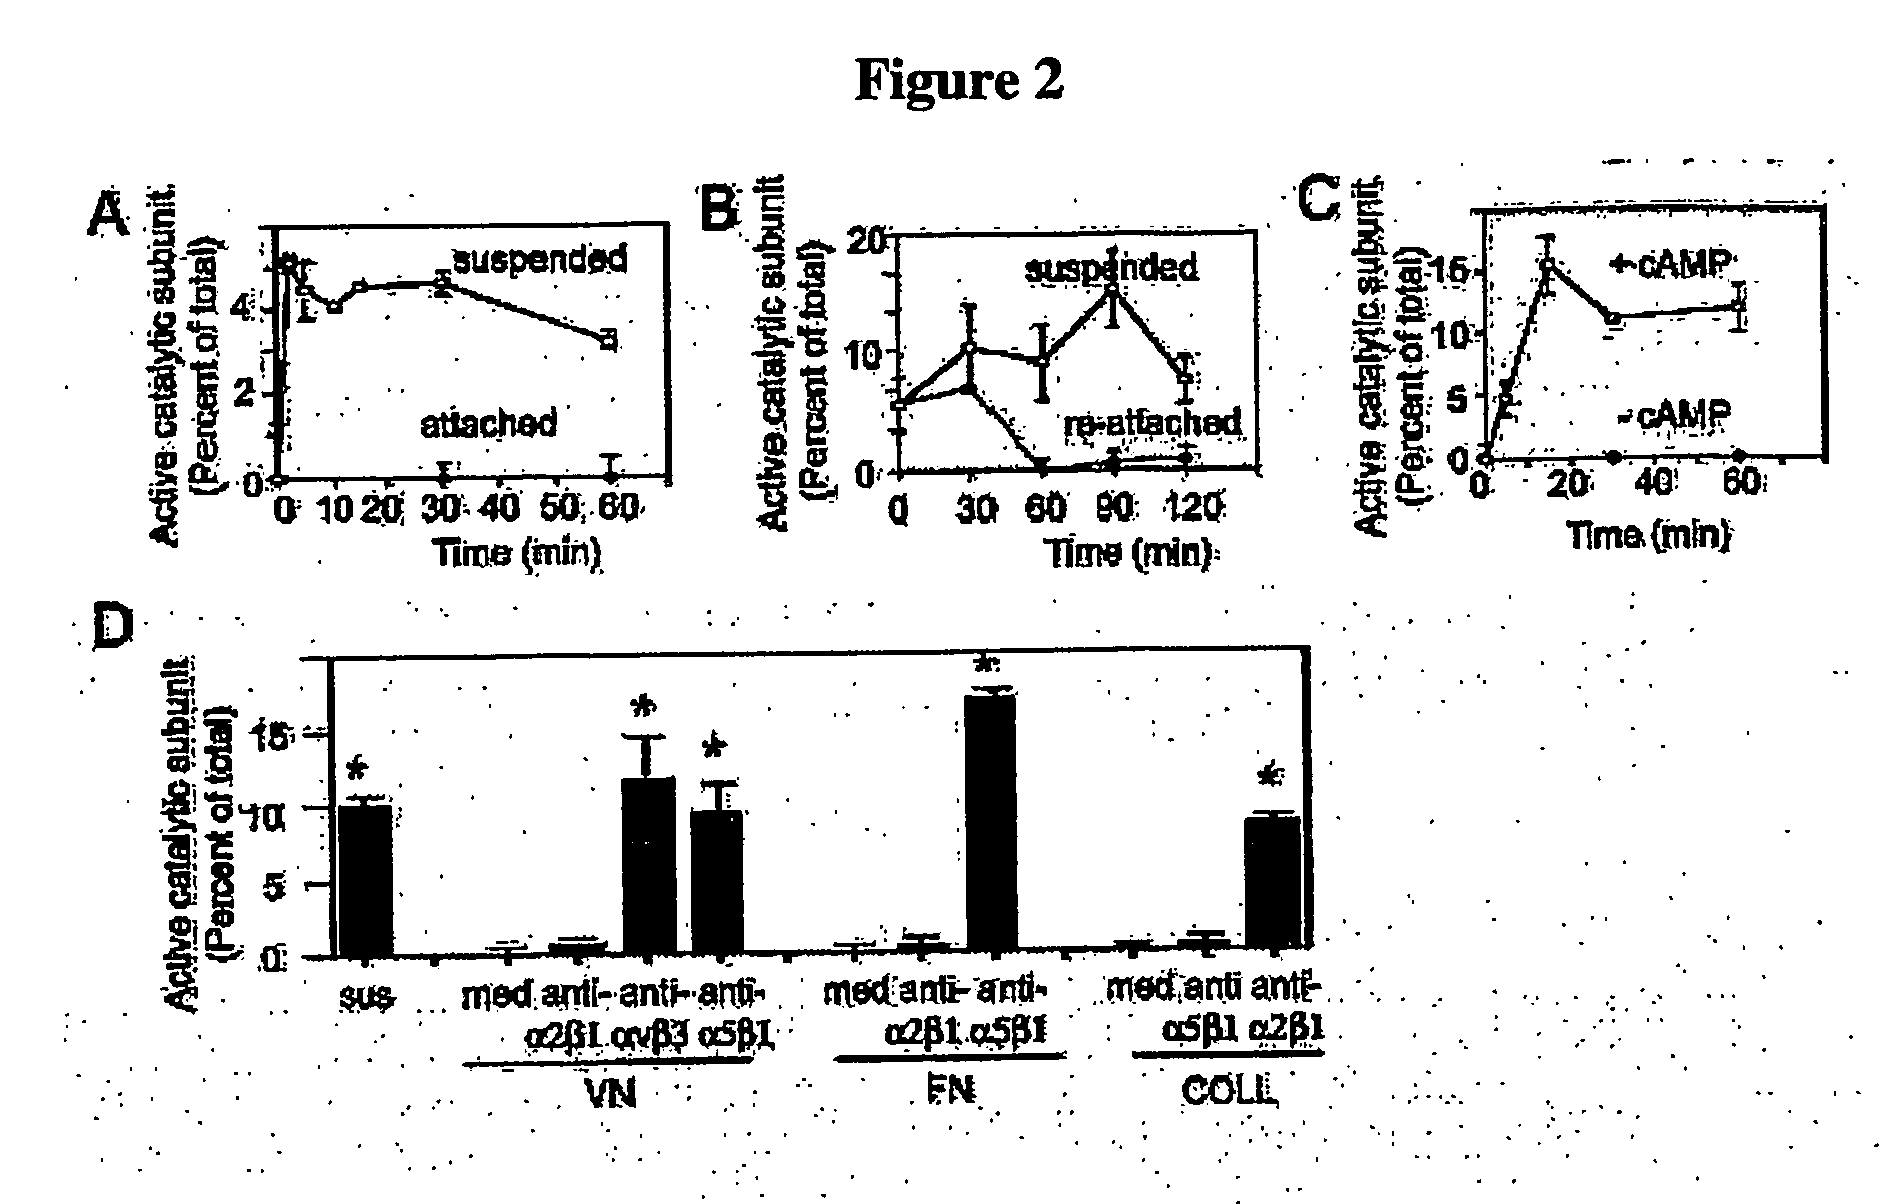 Methods For inhibiting angiogenesis, cell migration, cell adhesion, and cell survival